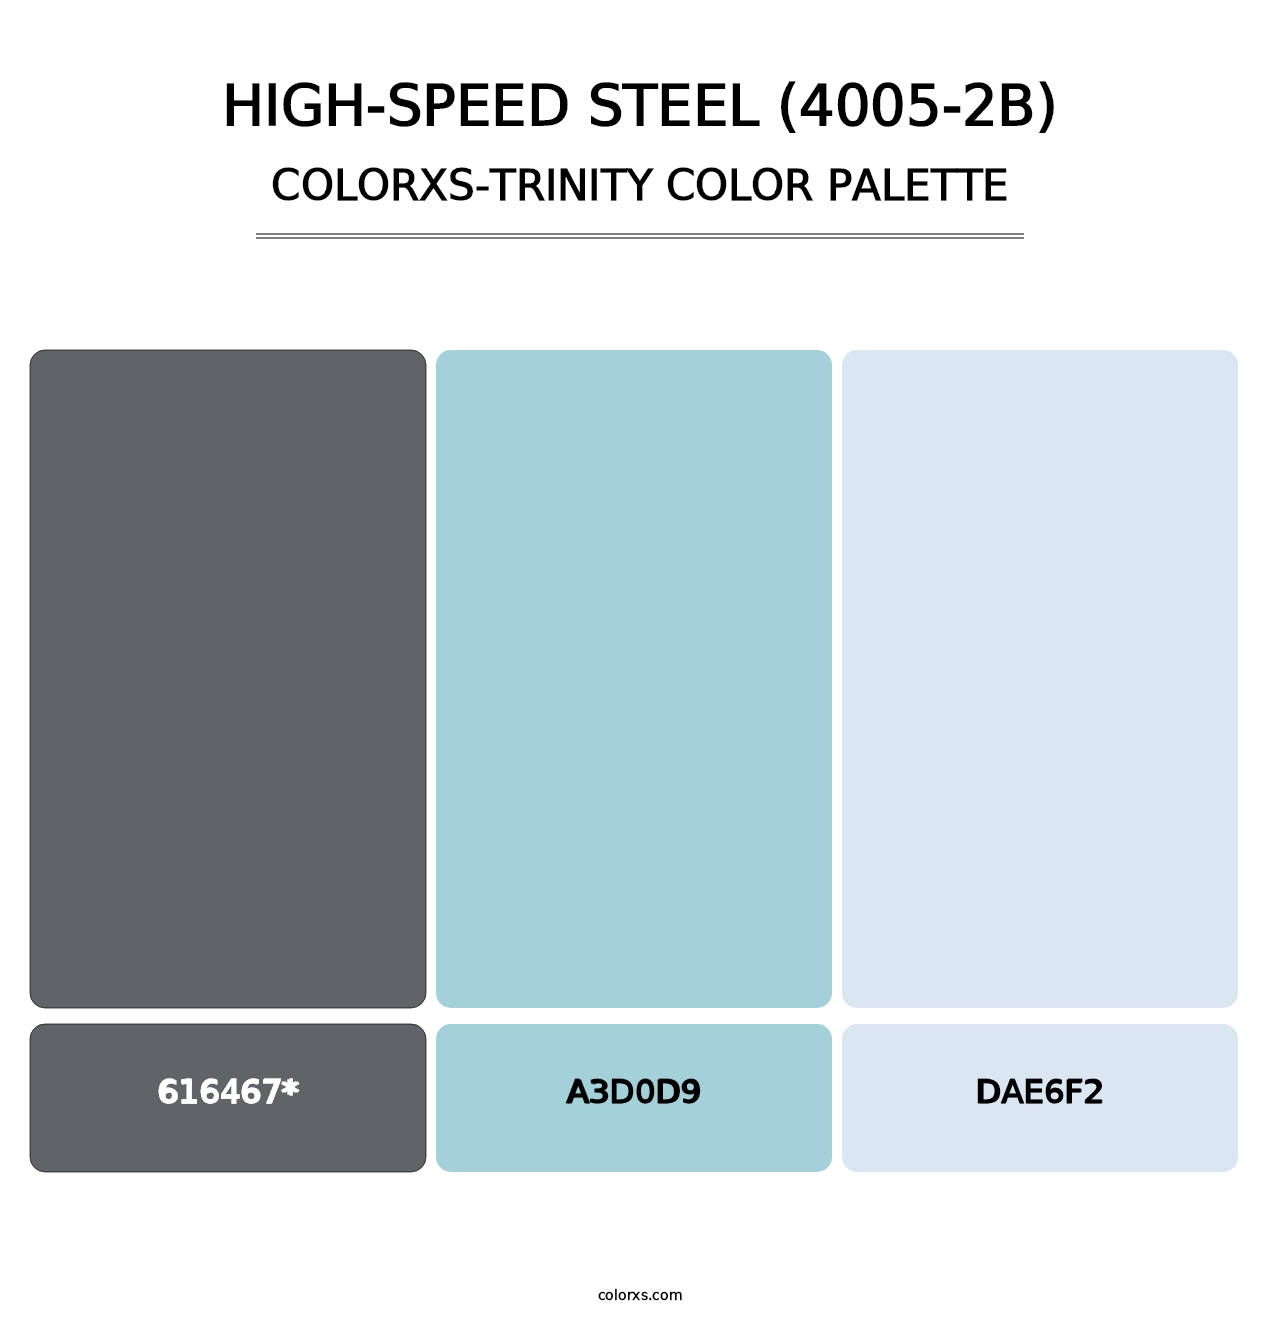 High-Speed Steel (4005-2B) - Colorxs Trinity Palette